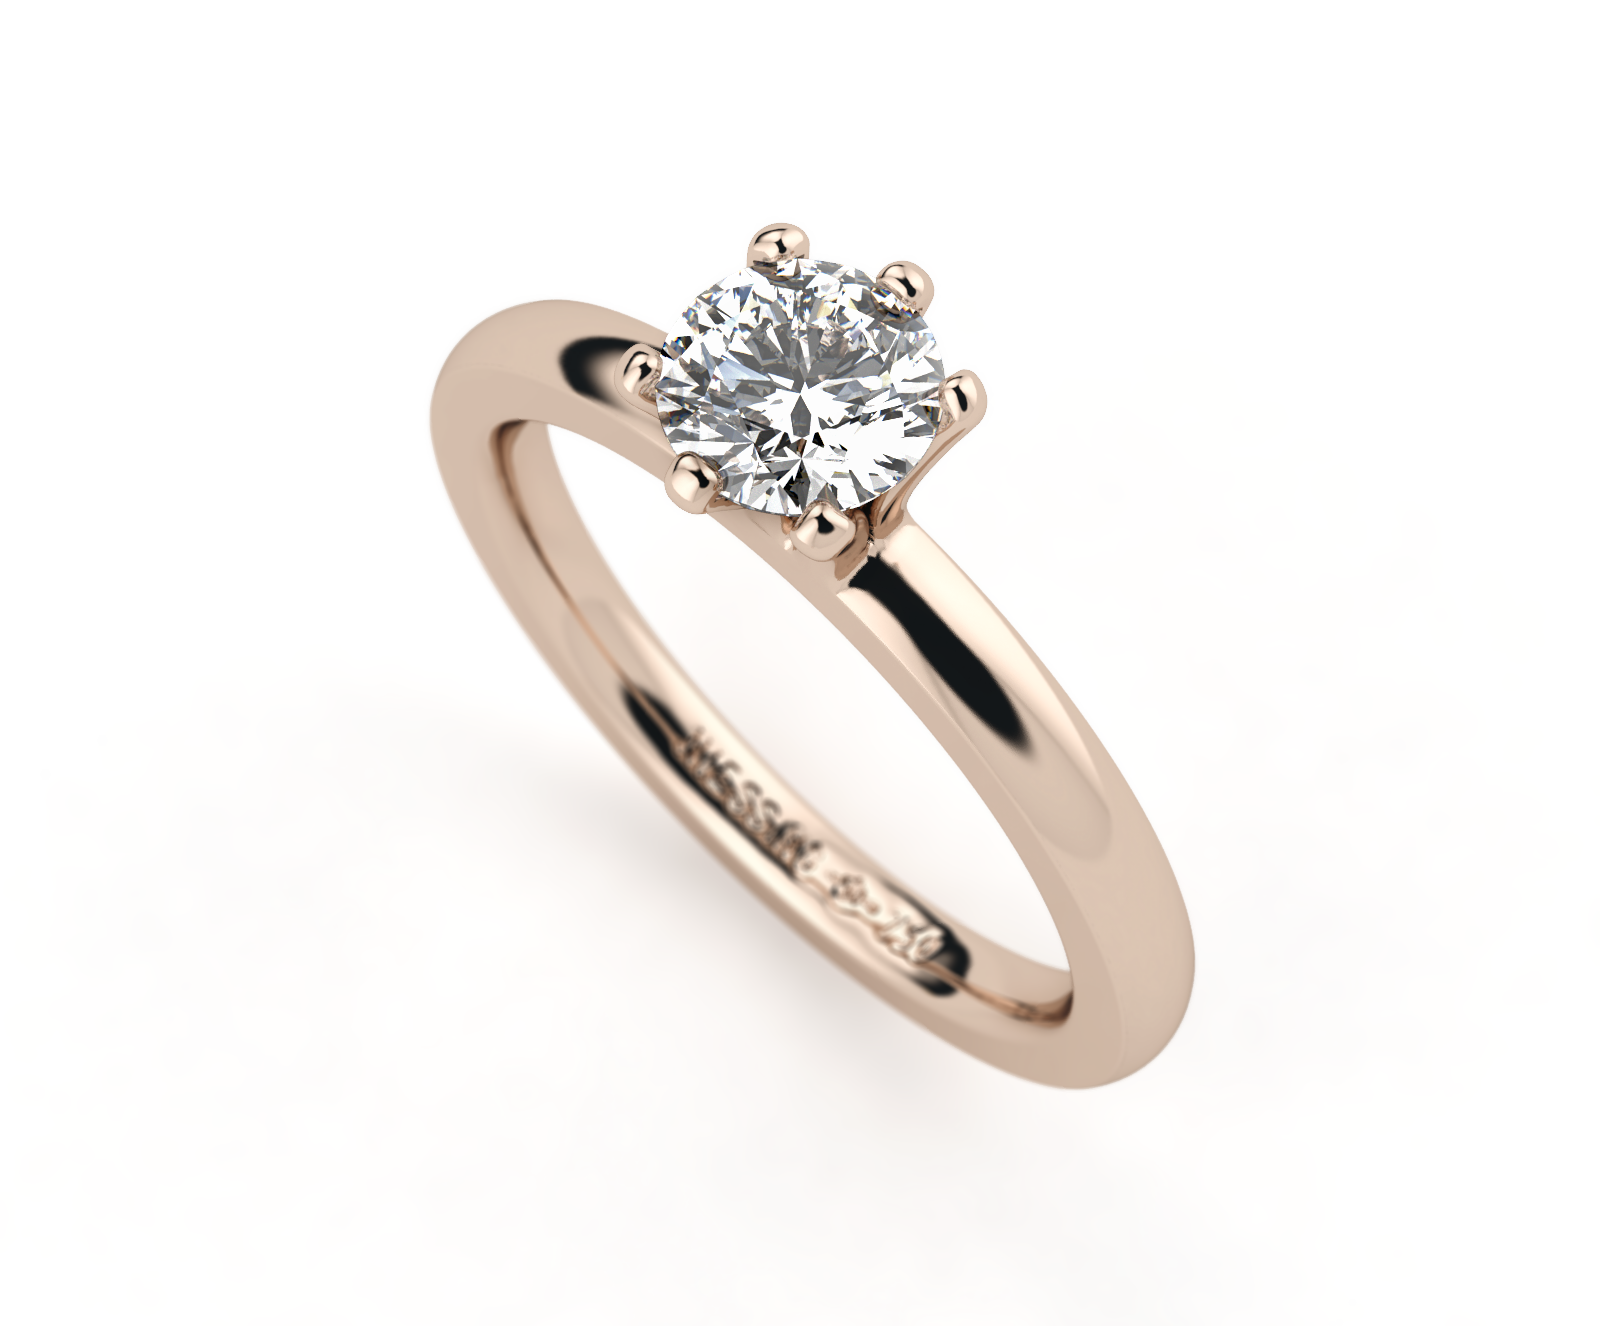 How much should I spend on an engagement ring? - Lebrusan Studio